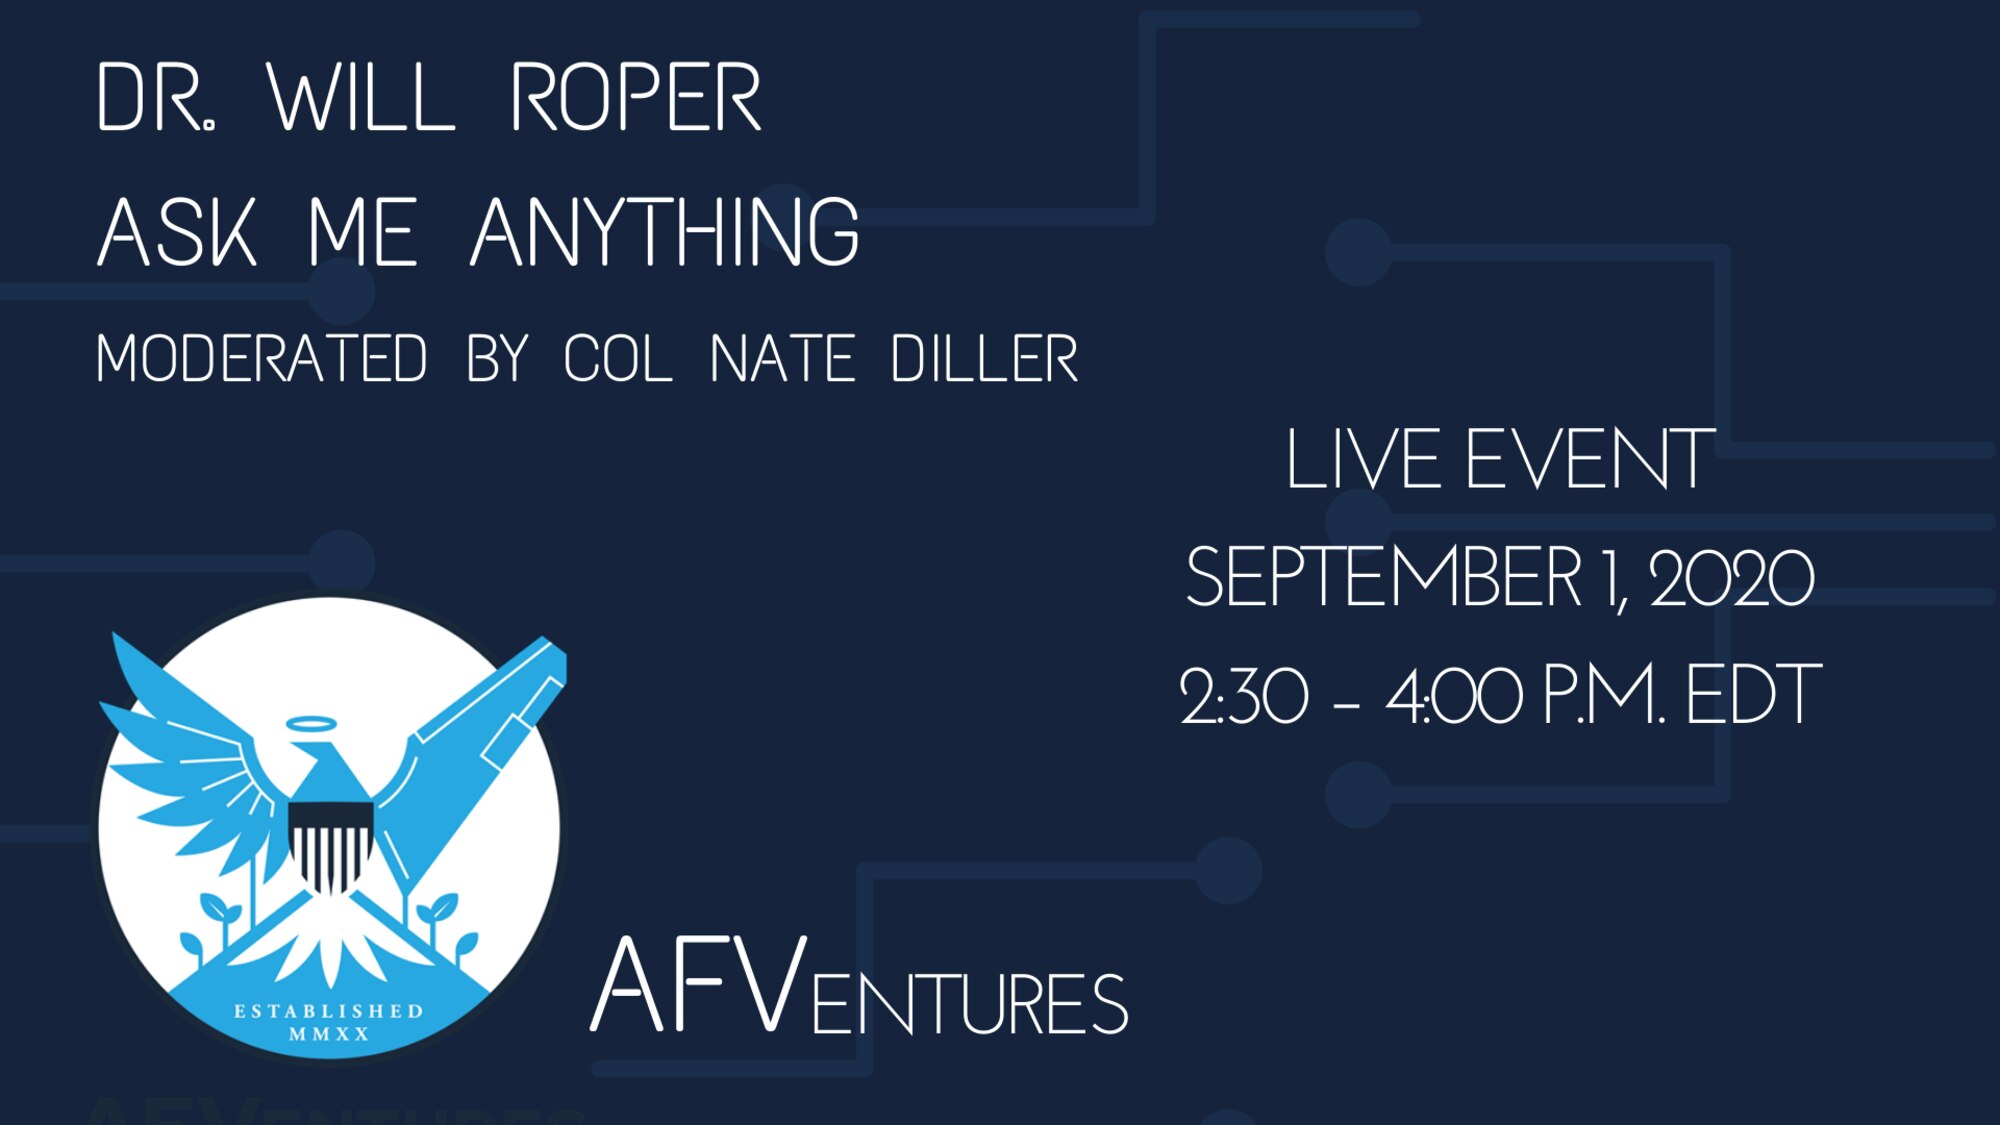 Dr. Will Roper, assistant secretary of the Air Force for acquisition, technology and logistics, is scheduled to host an “Ask Me Anything” event for AFVentures, Sept. 1, 2020. (U.S. Air Force courtesy graphic)